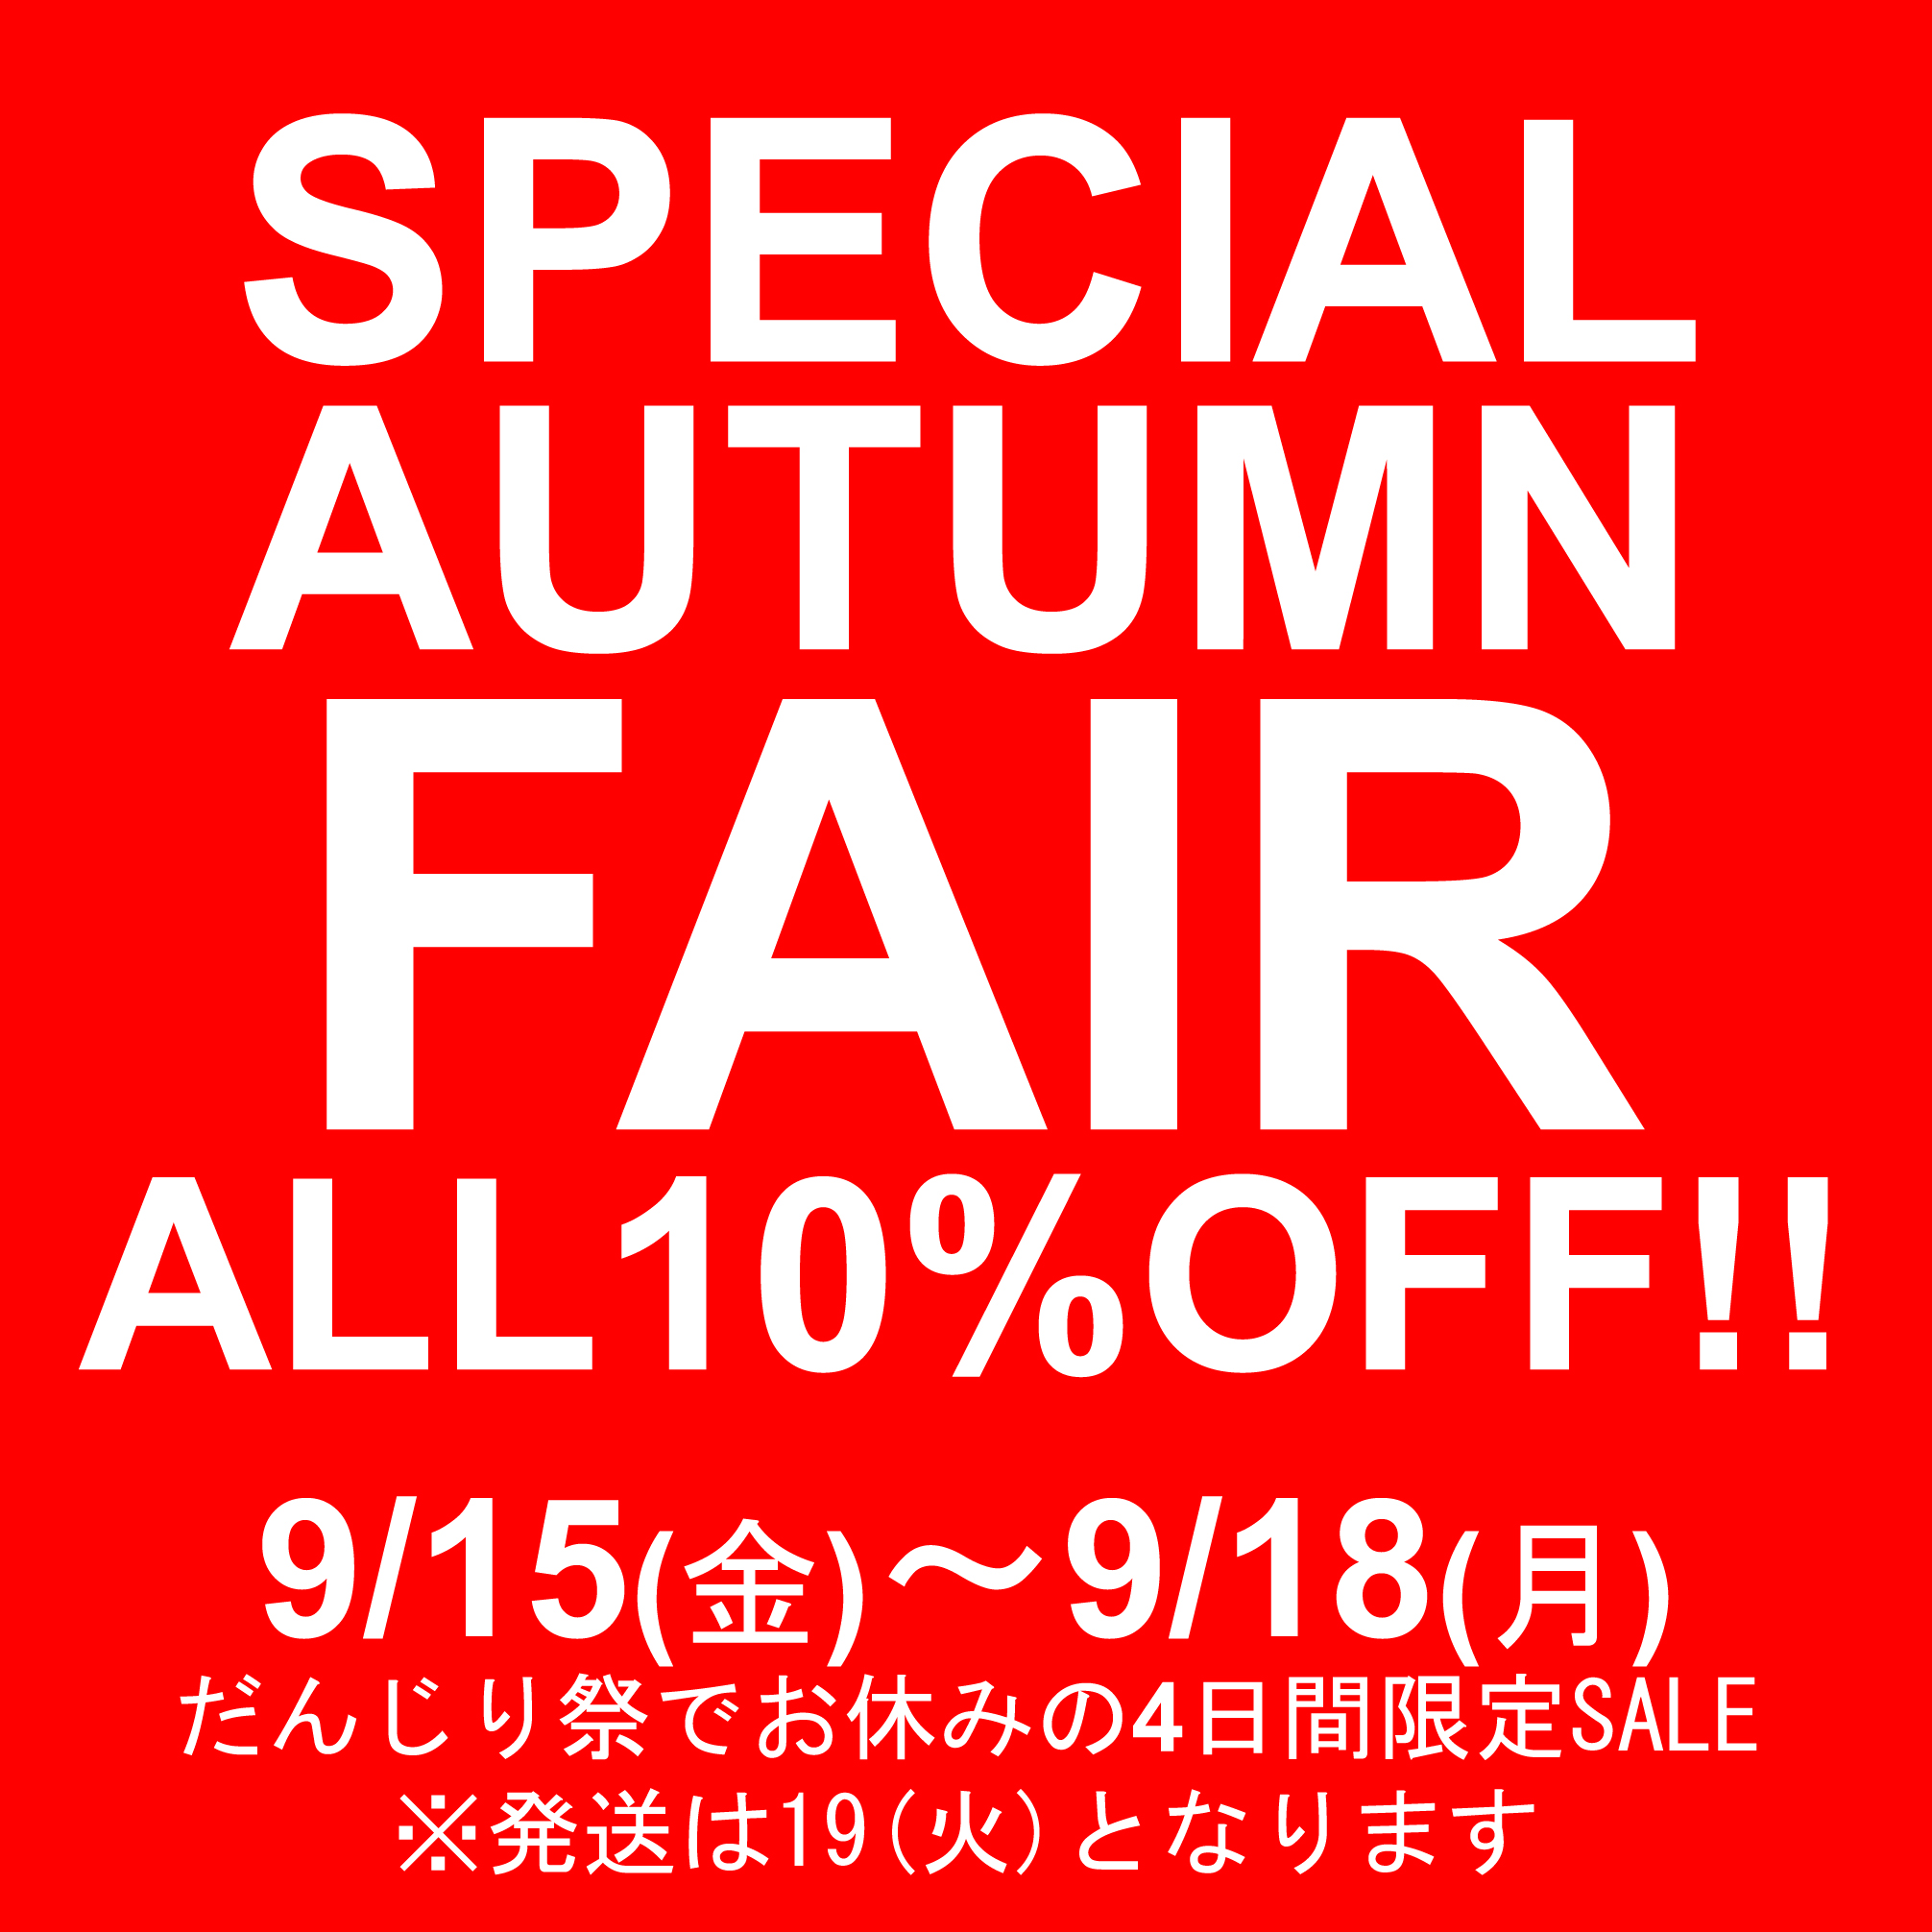 【SPECIAL AUTUMN SALE】 9/15〜18の4日間限定 全品10%OFF